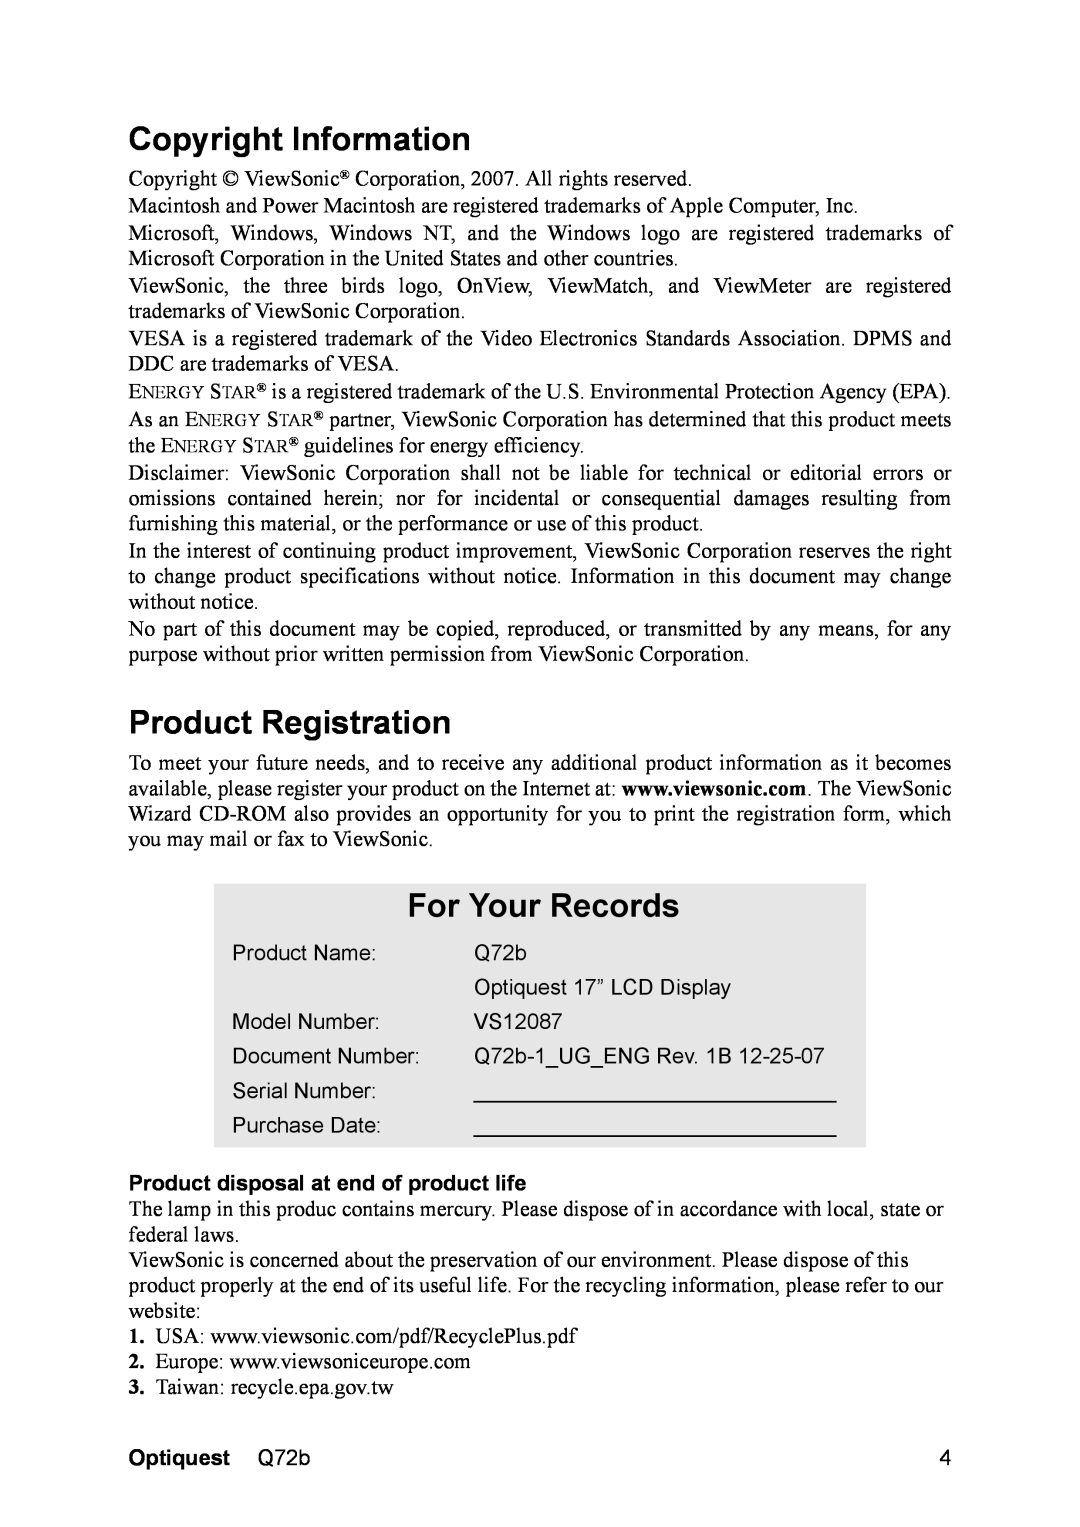 ViewSonic VS12087 Copyright Information, Product Registration, For Your Records, Product disposal at end of product life 